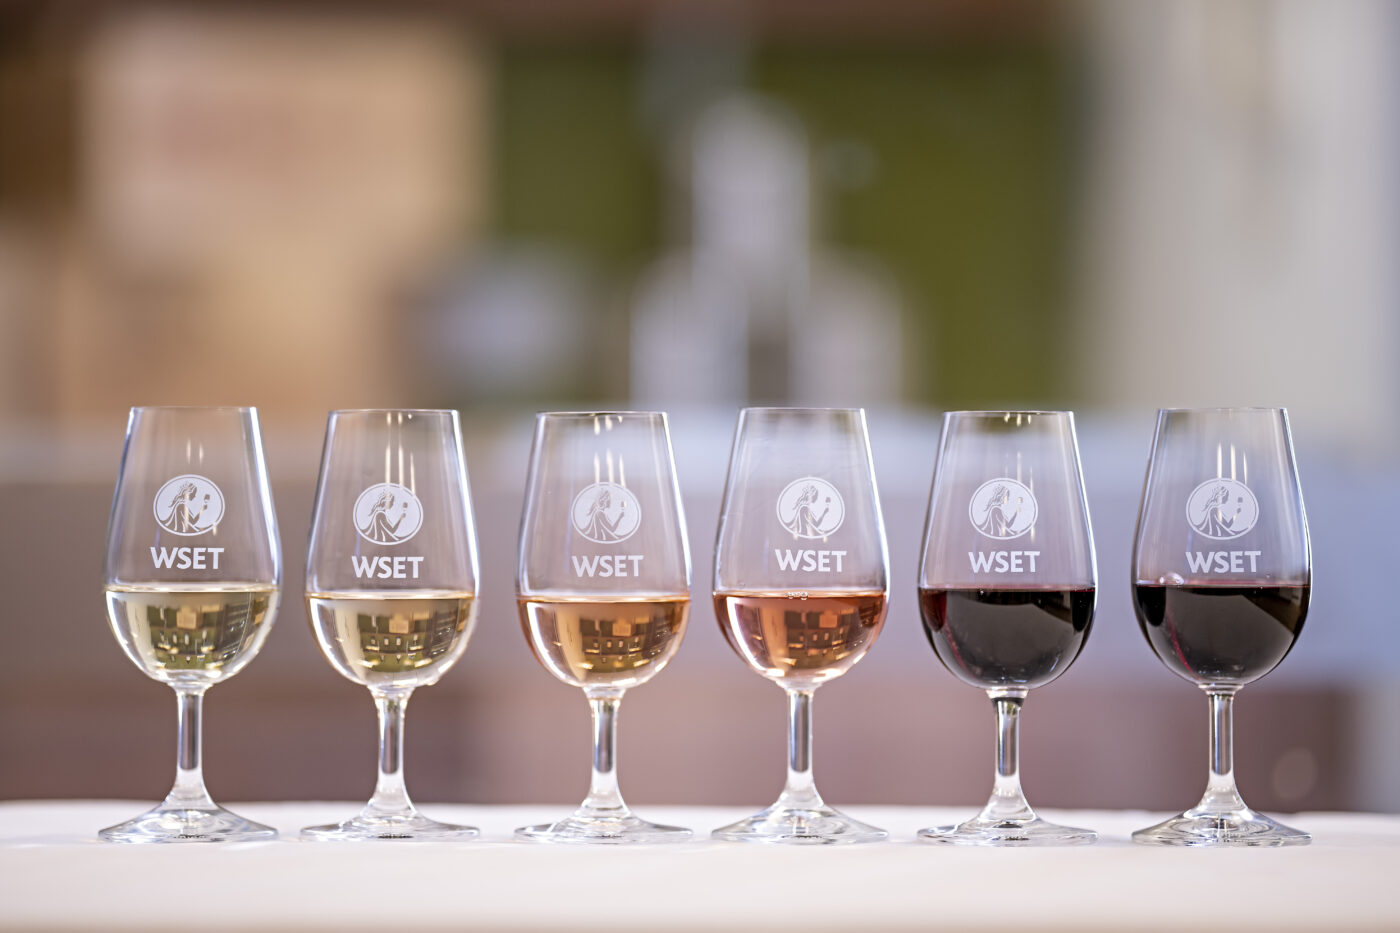 A row of 8 various types of wine from white, rose to red in glasses